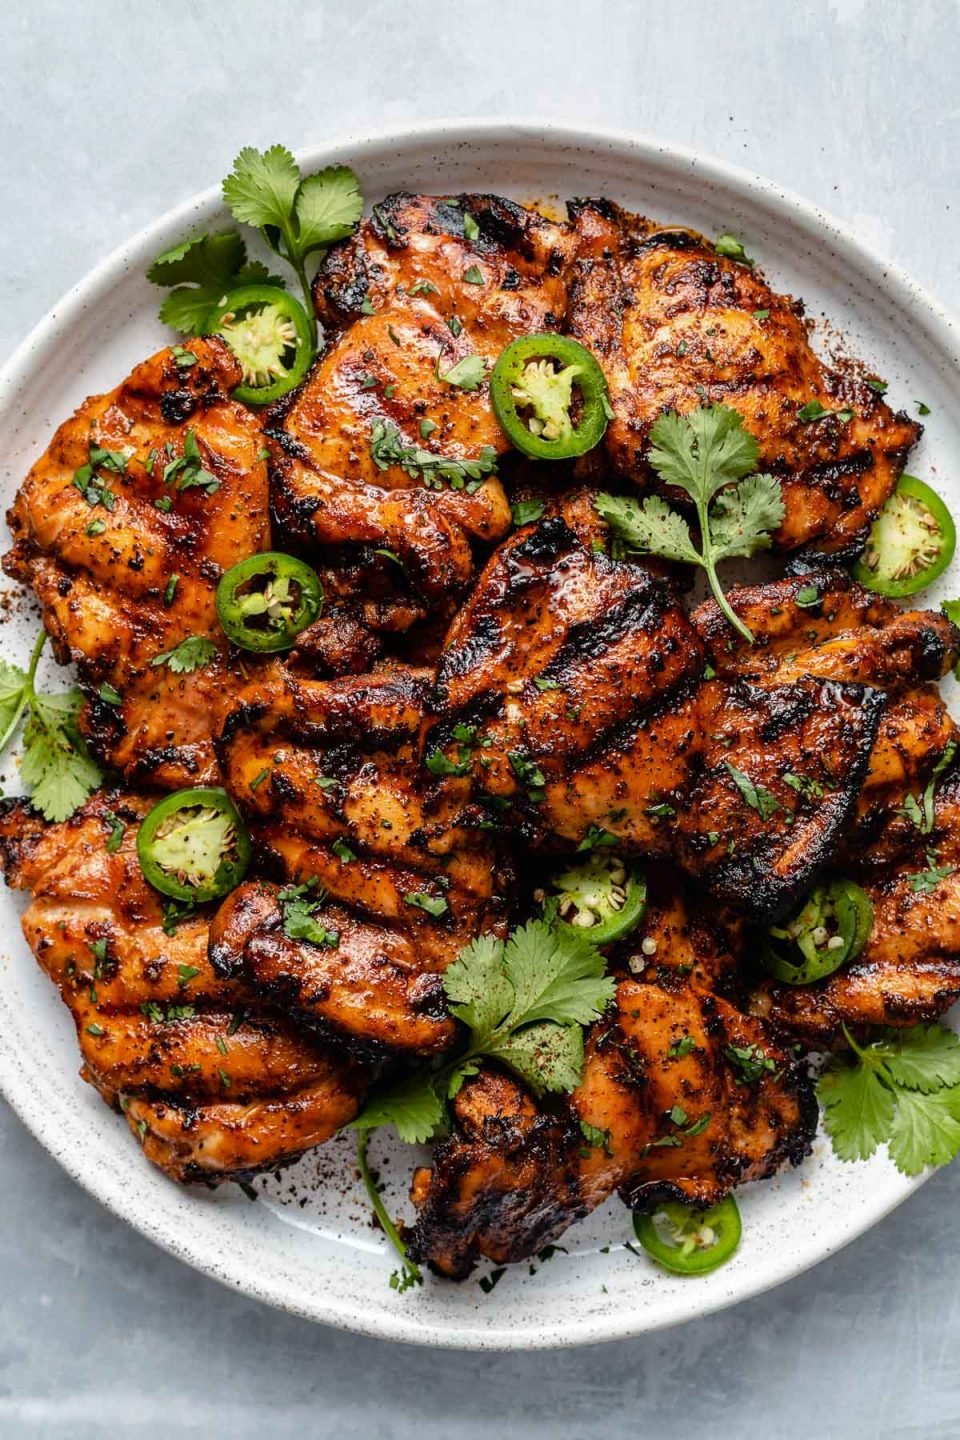 Grilled chicken thighs shown on a white speckled plate atop a light blue surface. The chicken is garnished with fresh cilantro leaves, sliced jalapeño, & ground black pepper.